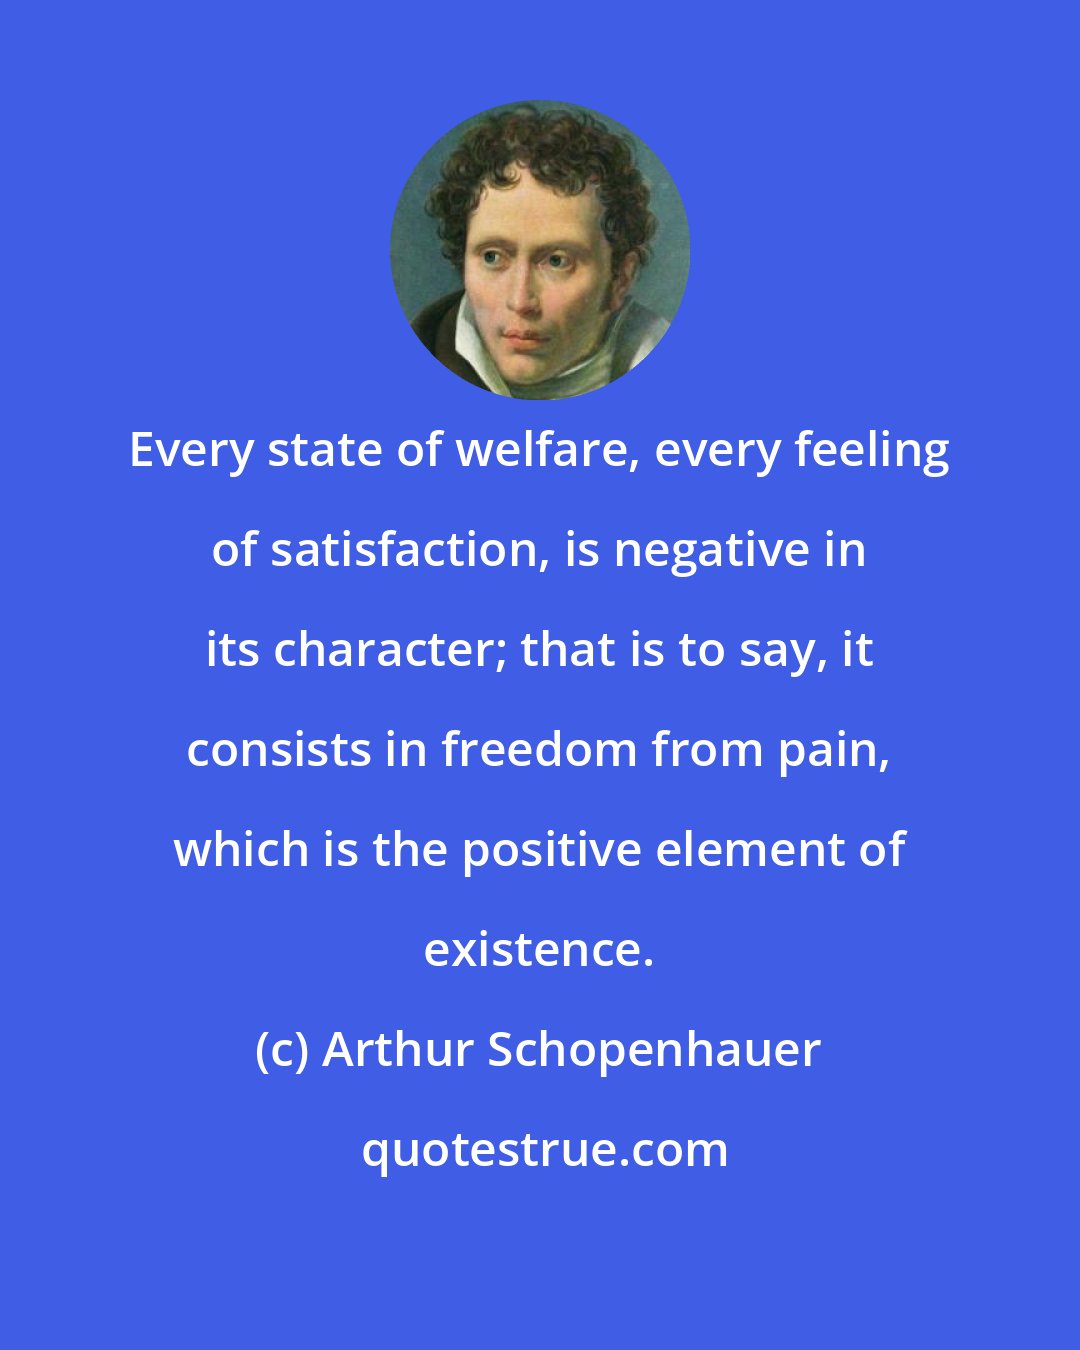 Arthur Schopenhauer: Every state of welfare, every feeling of satisfaction, is negative in its character; that is to say, it consists in freedom from pain, which is the positive element of existence.